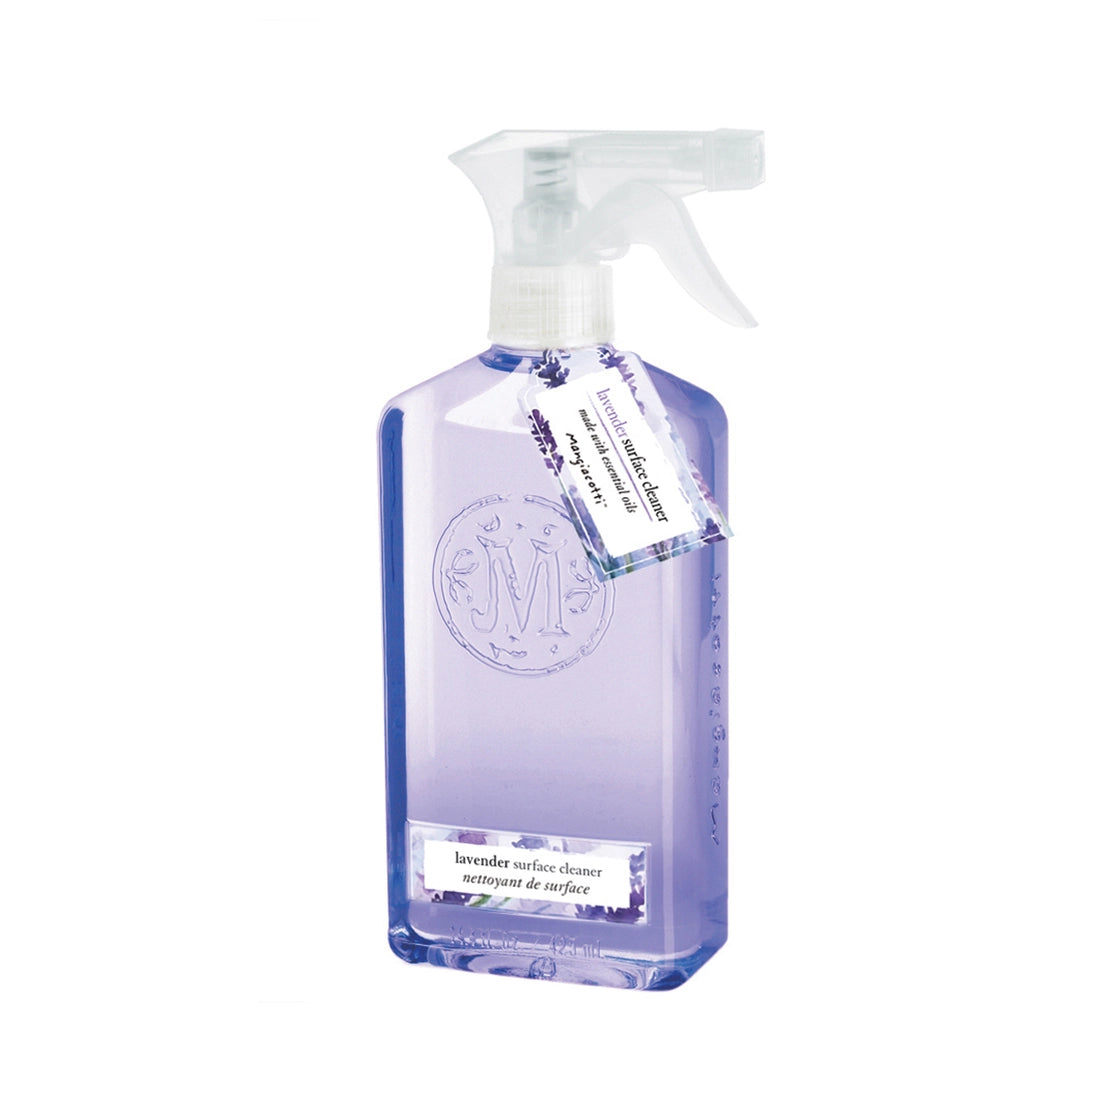 Transparent spray bottle with Mangiacotti Lavender Surface Cleaner and a label featuring elegant script and a circular emblem, tied with a small white tag.